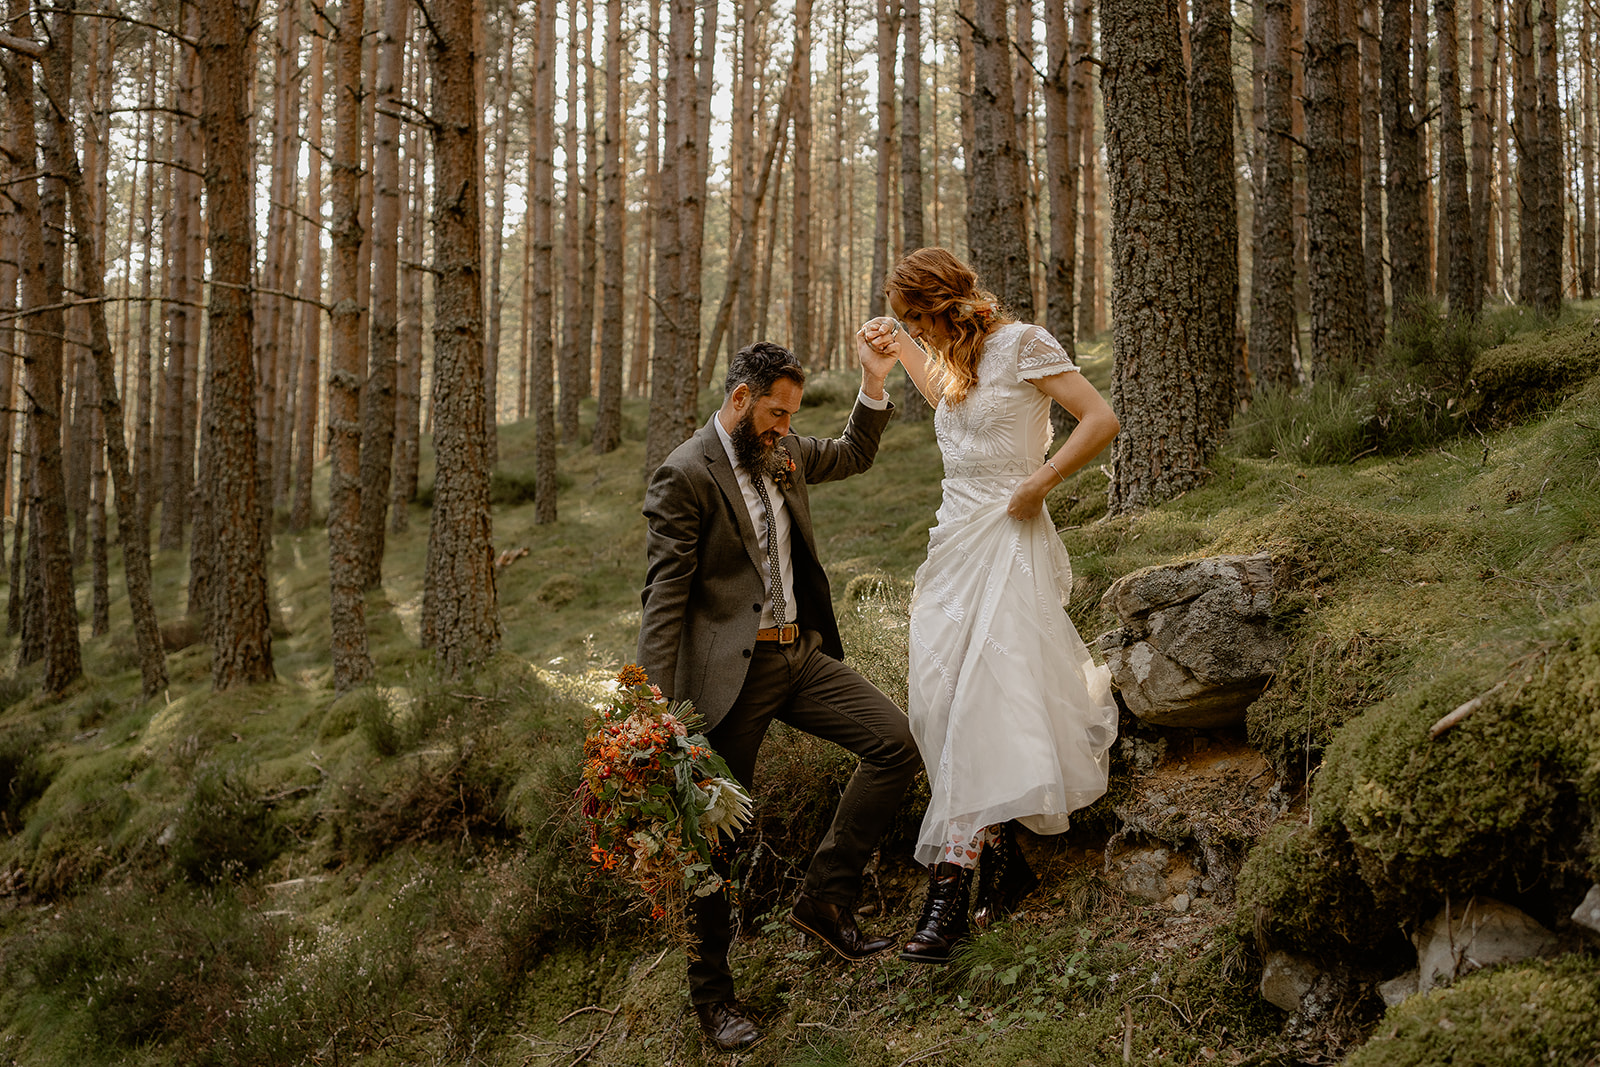 groom helps bride down steep mossy bank in woodland by holding her hand. He holds her bouquet of flowers while she walks